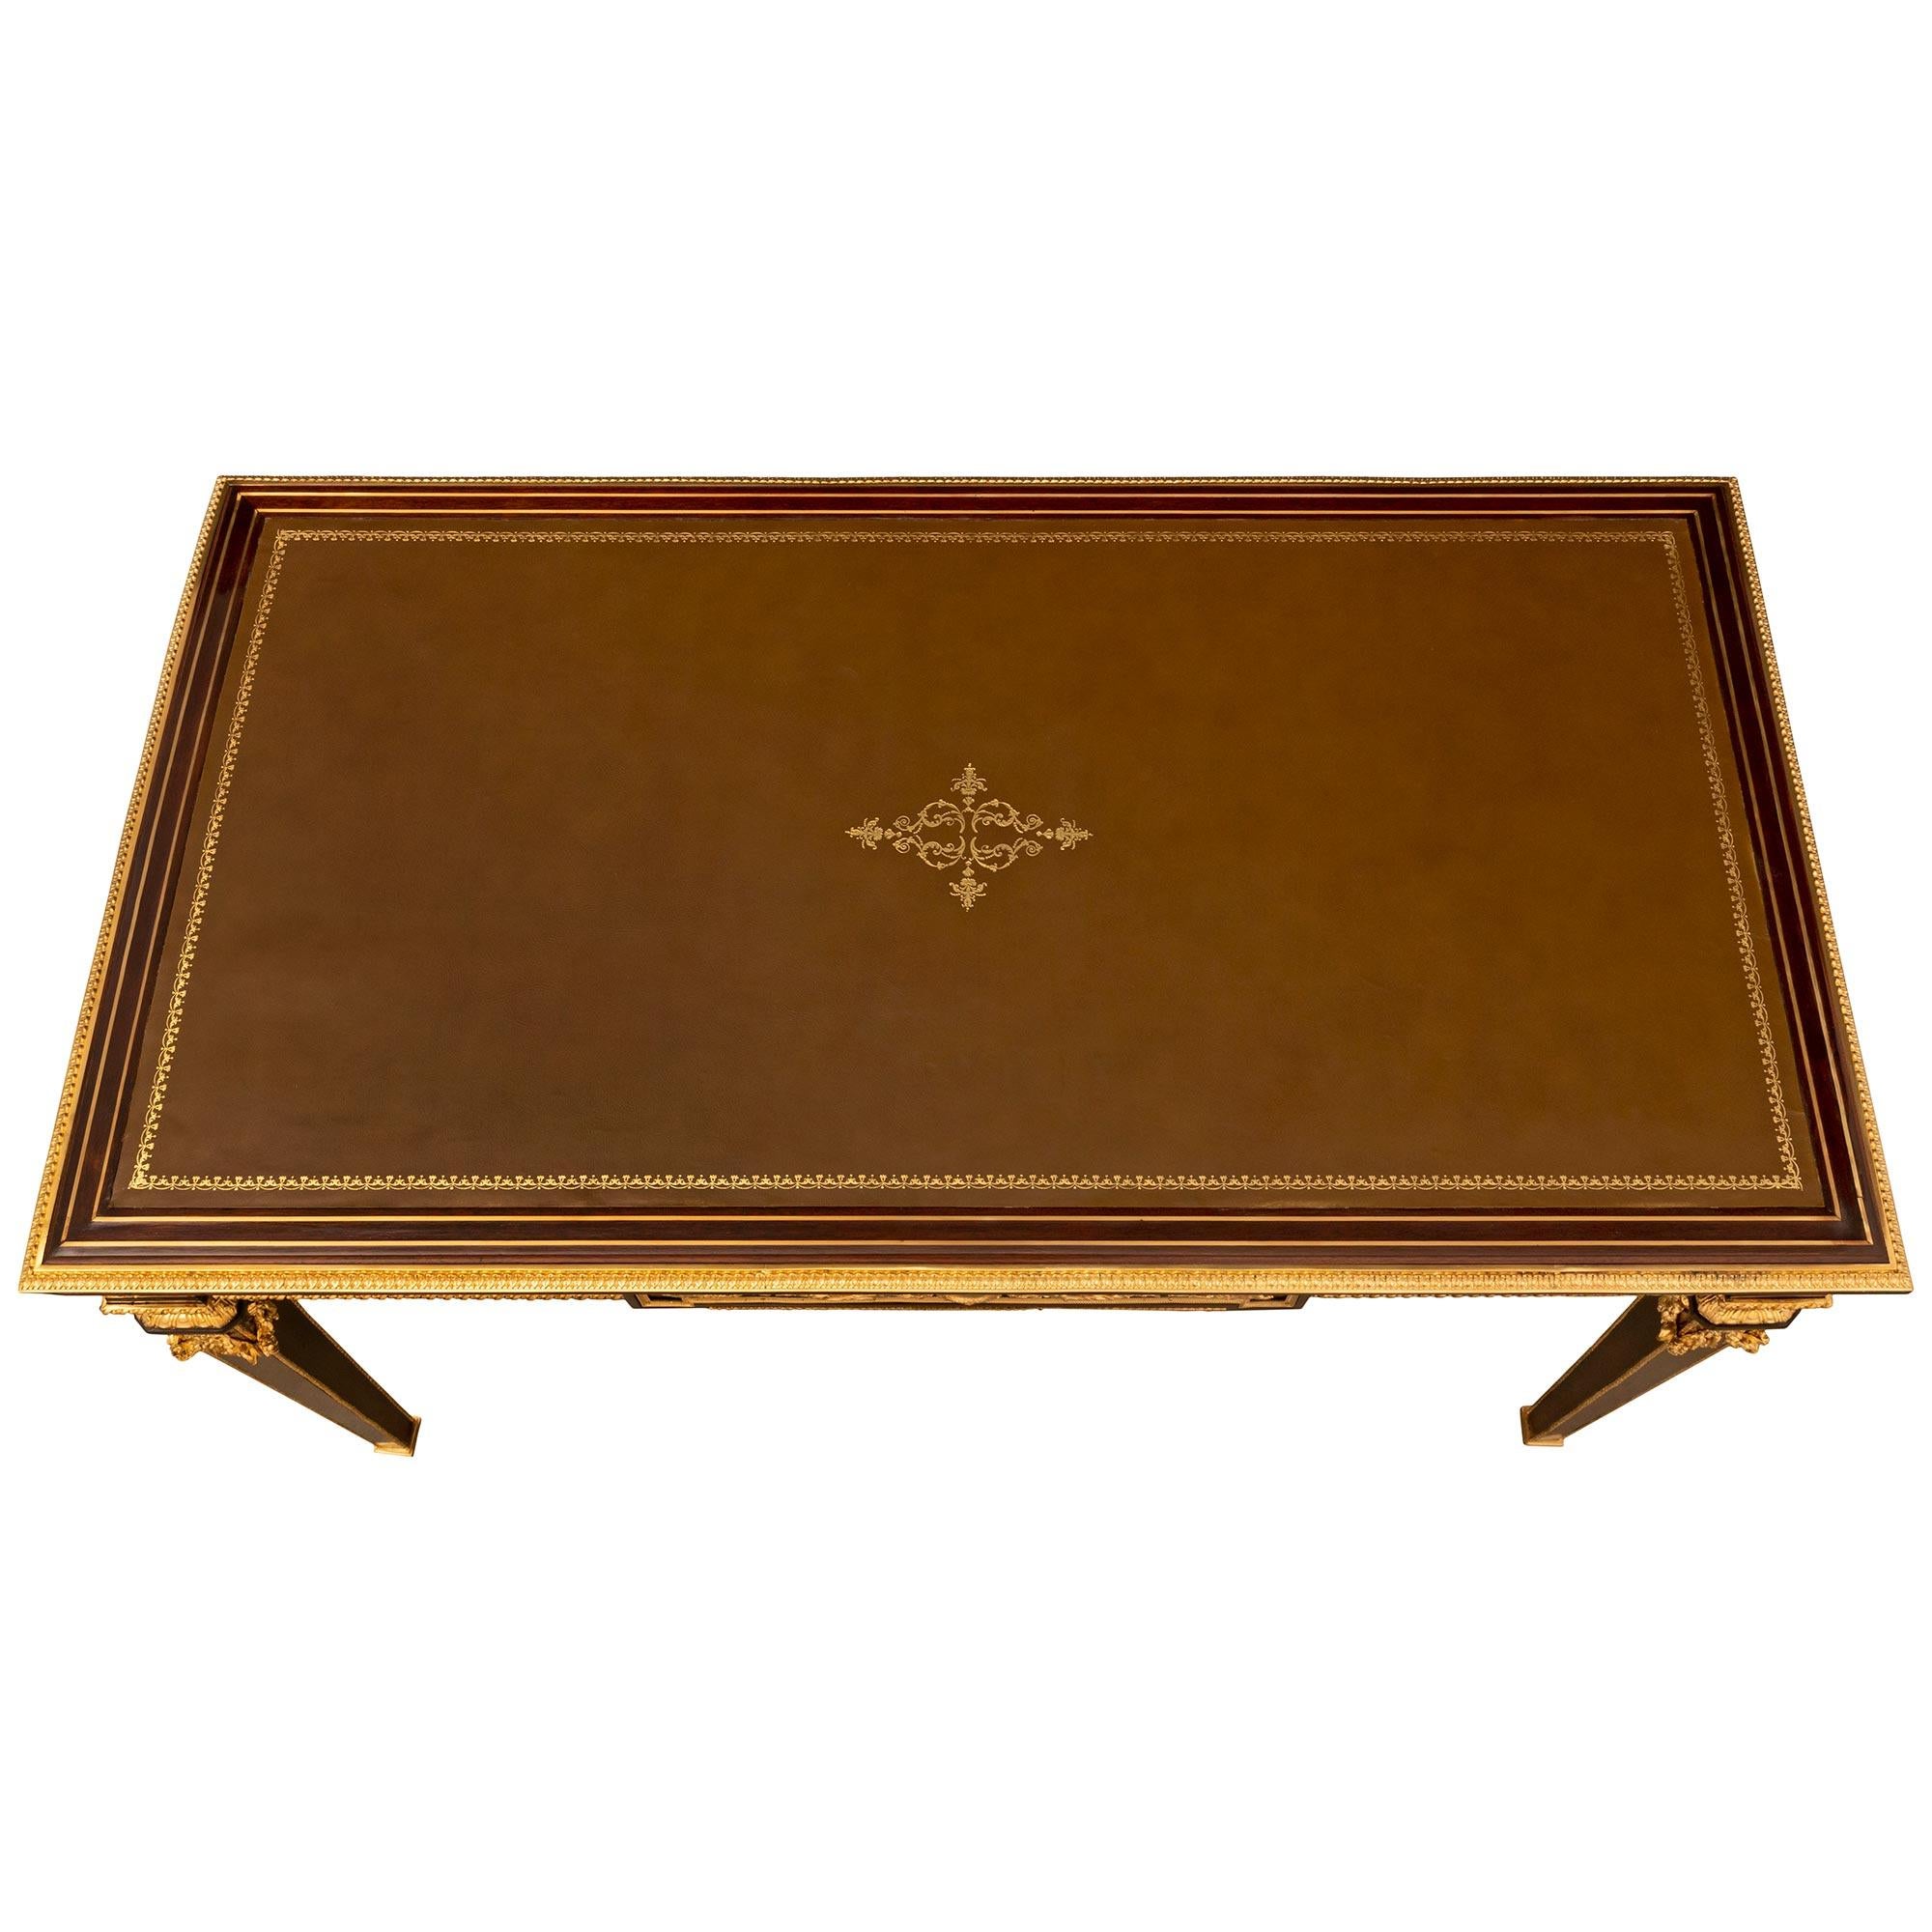 A striking and very high quality French 19th century Louis XVI st. Belle Époque period Mahogany, brass and ormolu desk after a model by Jean-Henri Riesener and attributed to François Linke. The one drawer desk is raised by elegant square tapered